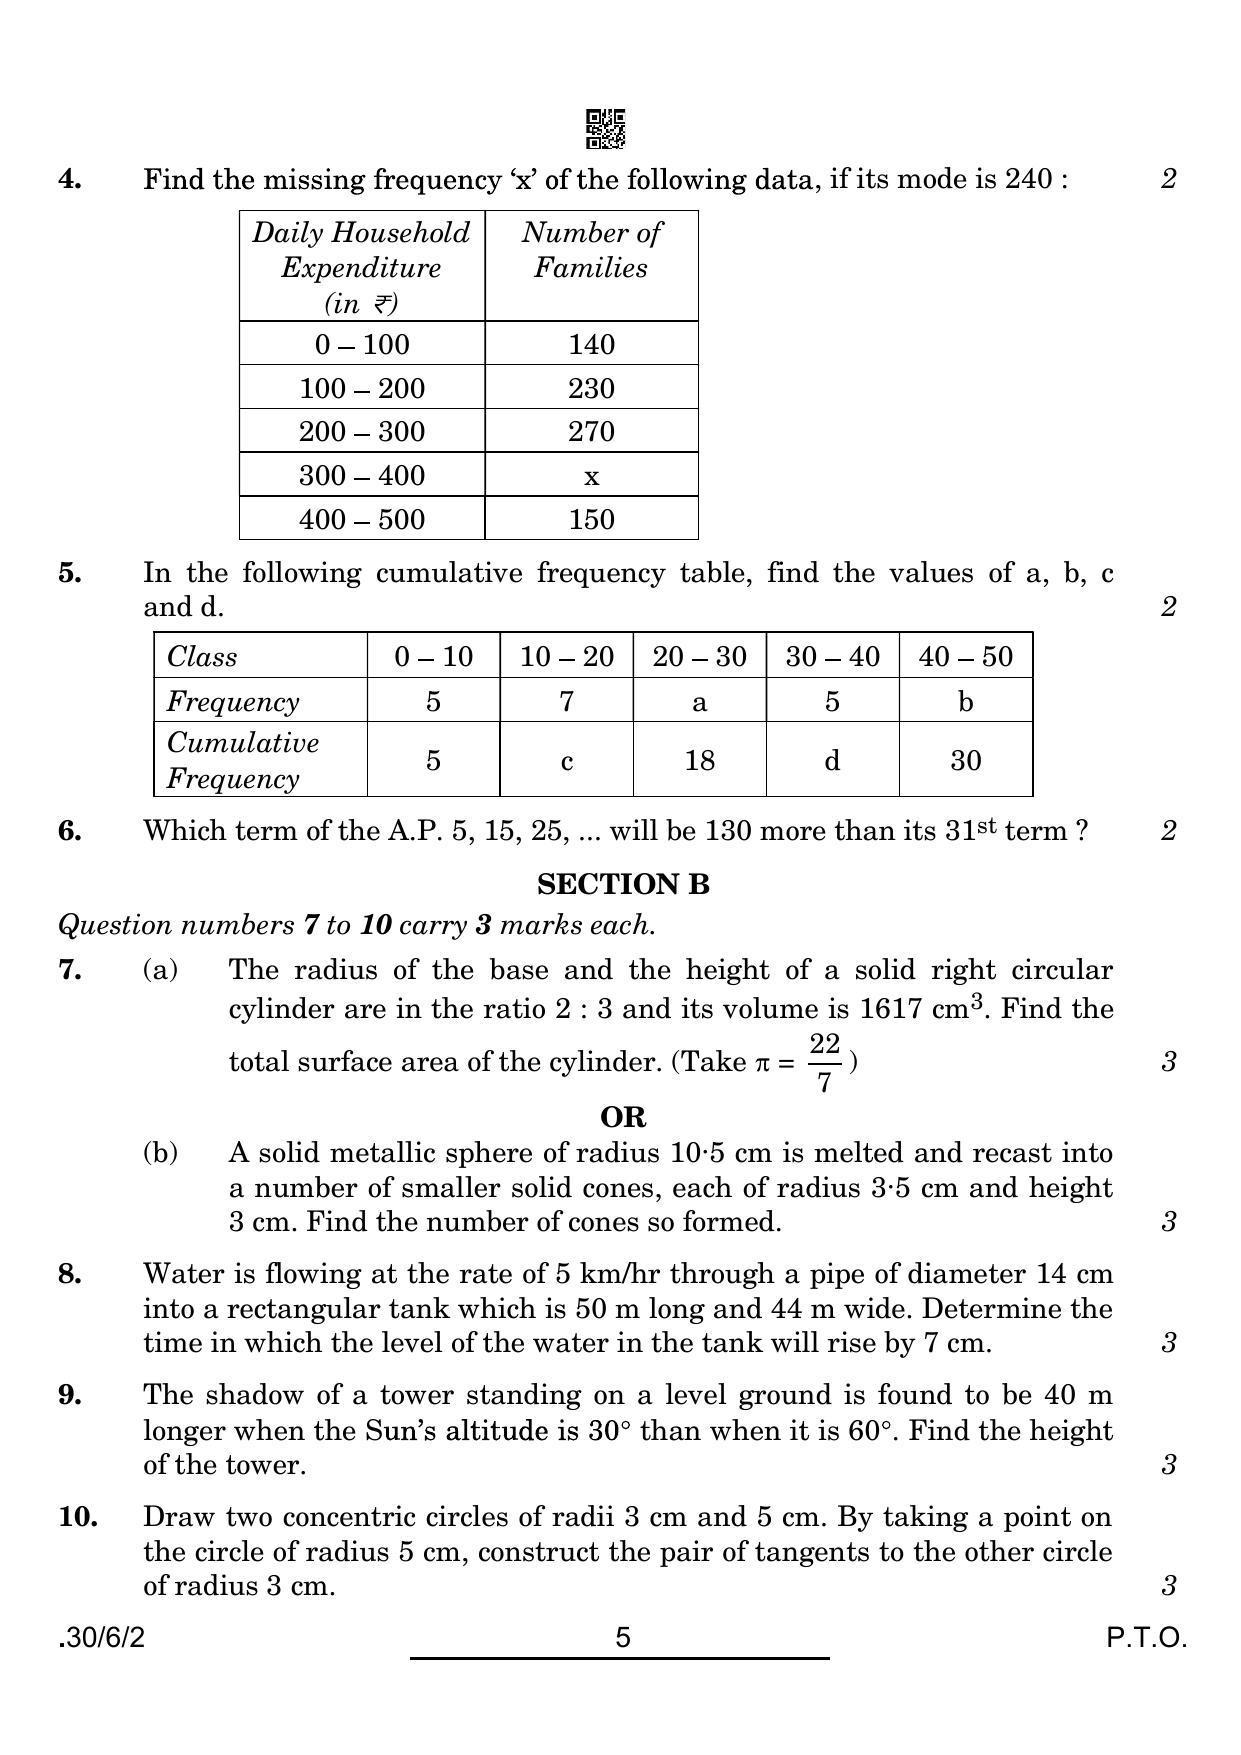 CBSE Class 10 30-6-2 Maths Std. 2022 Compartment Question Paper - Page 5